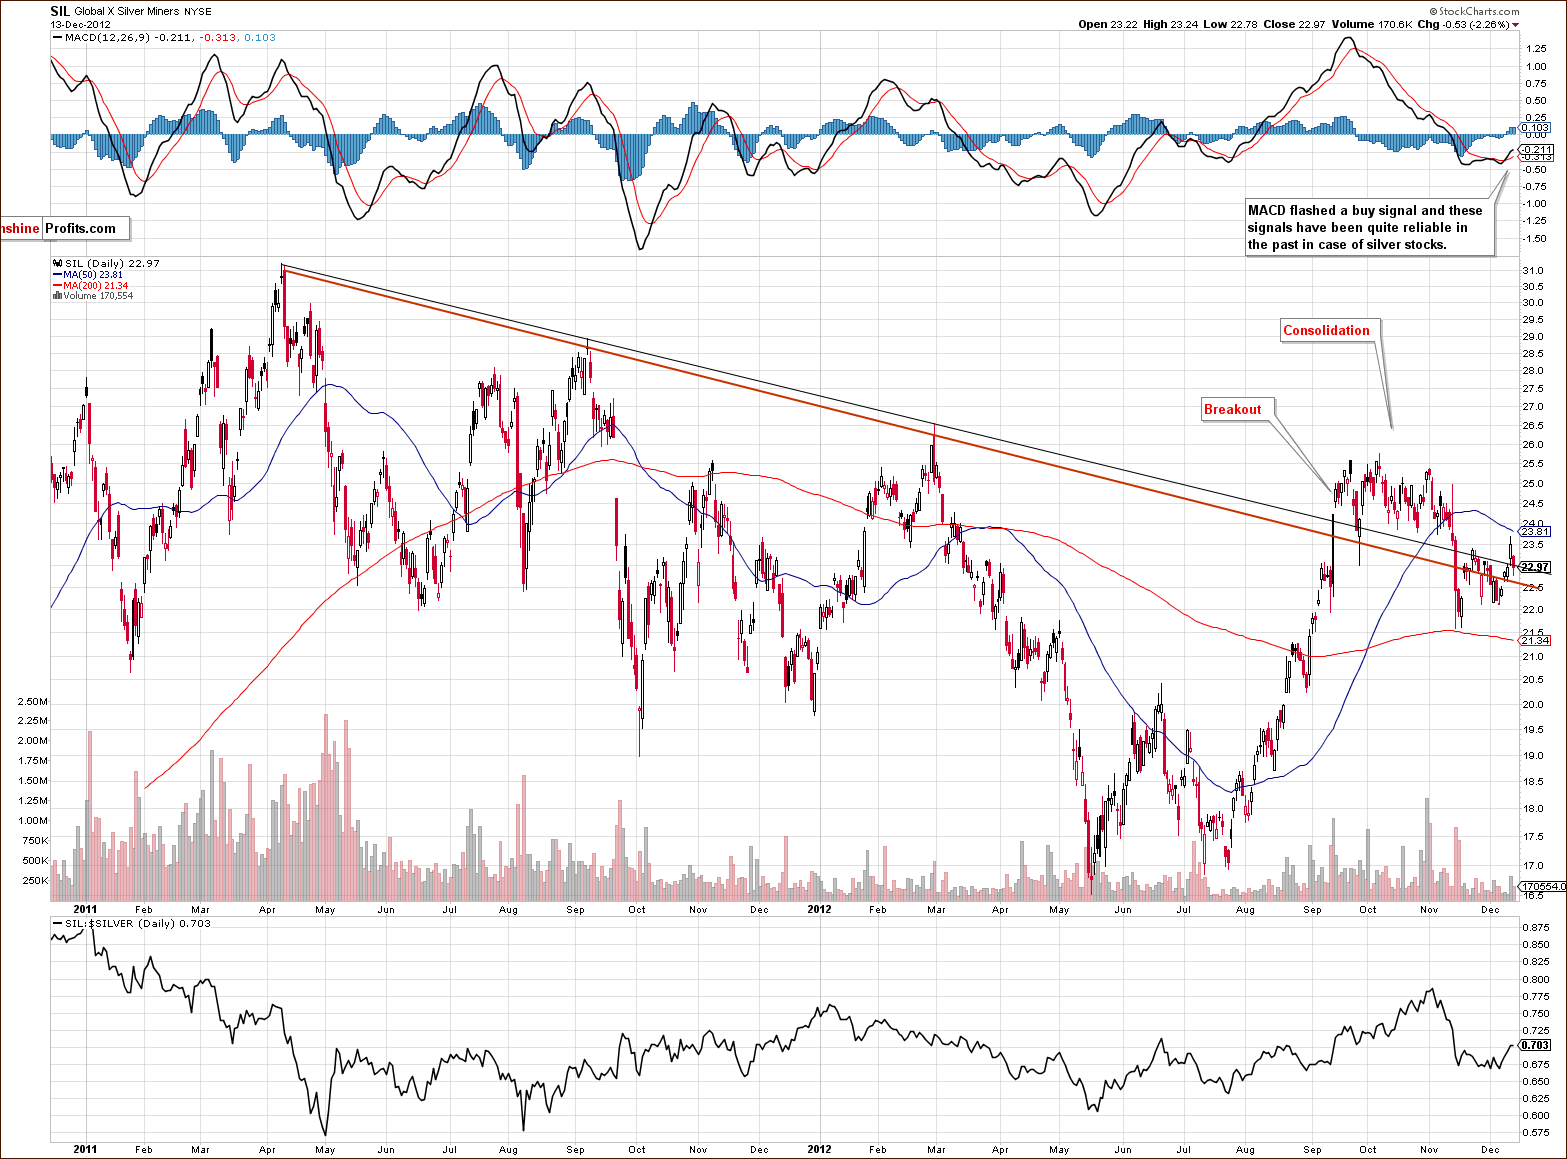 Long-term Global X Silver Miners - SIL